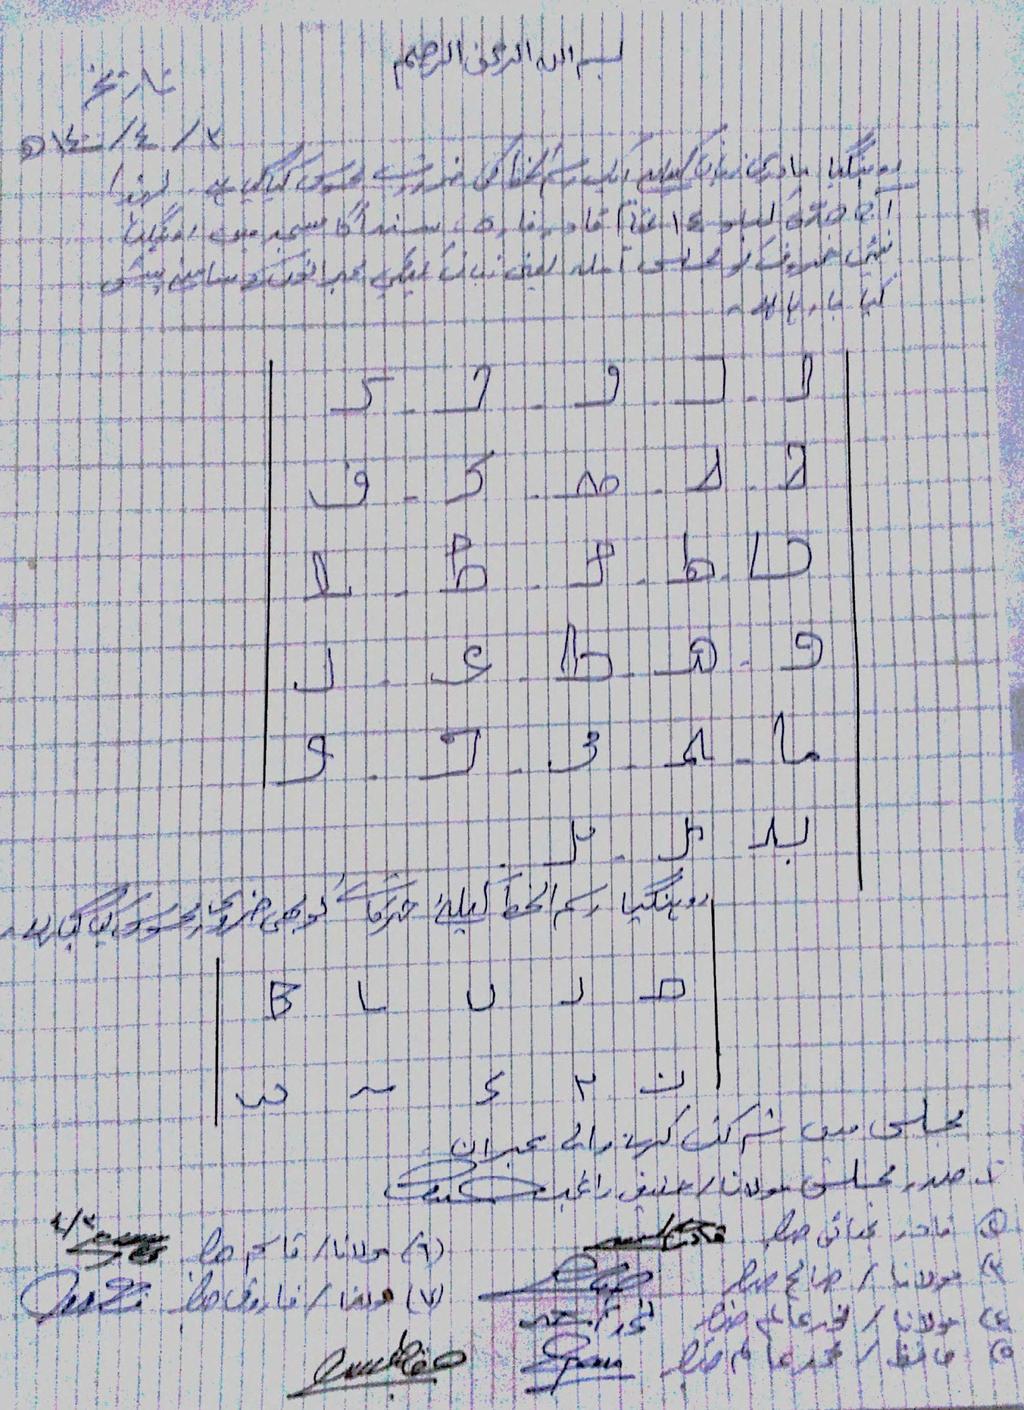 Figure 1: A document containing the Rohingya script as finalized by Hanif and others on